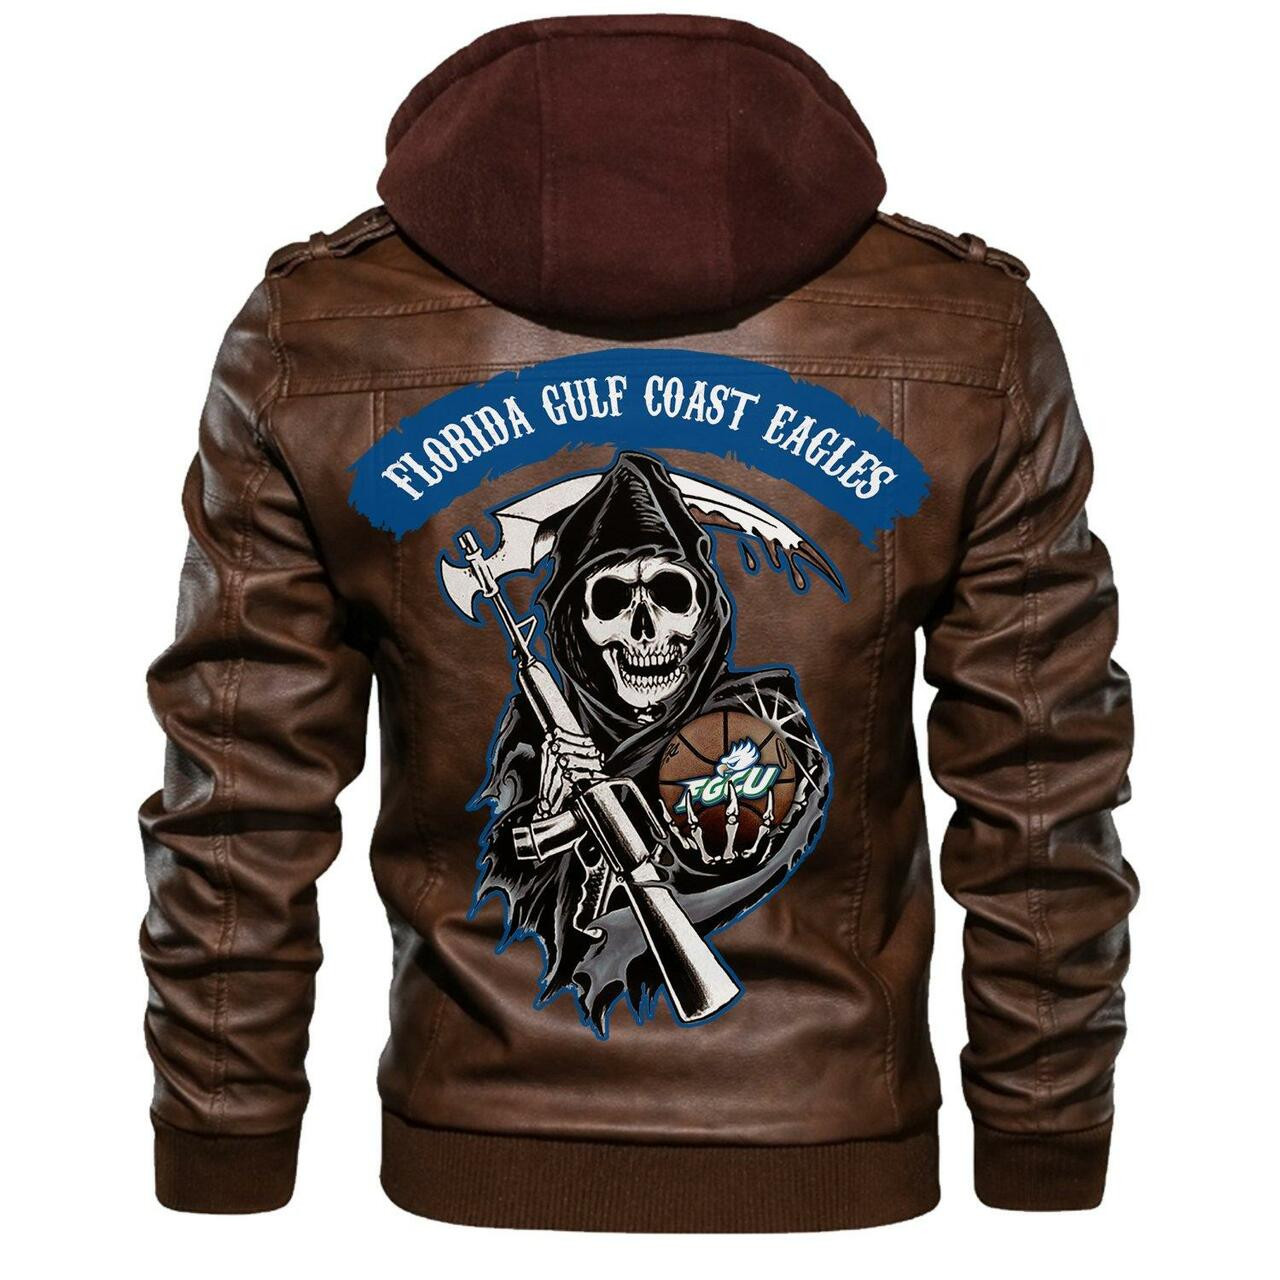 Don't wait another minute, Get Hot Leather Jacket today 74